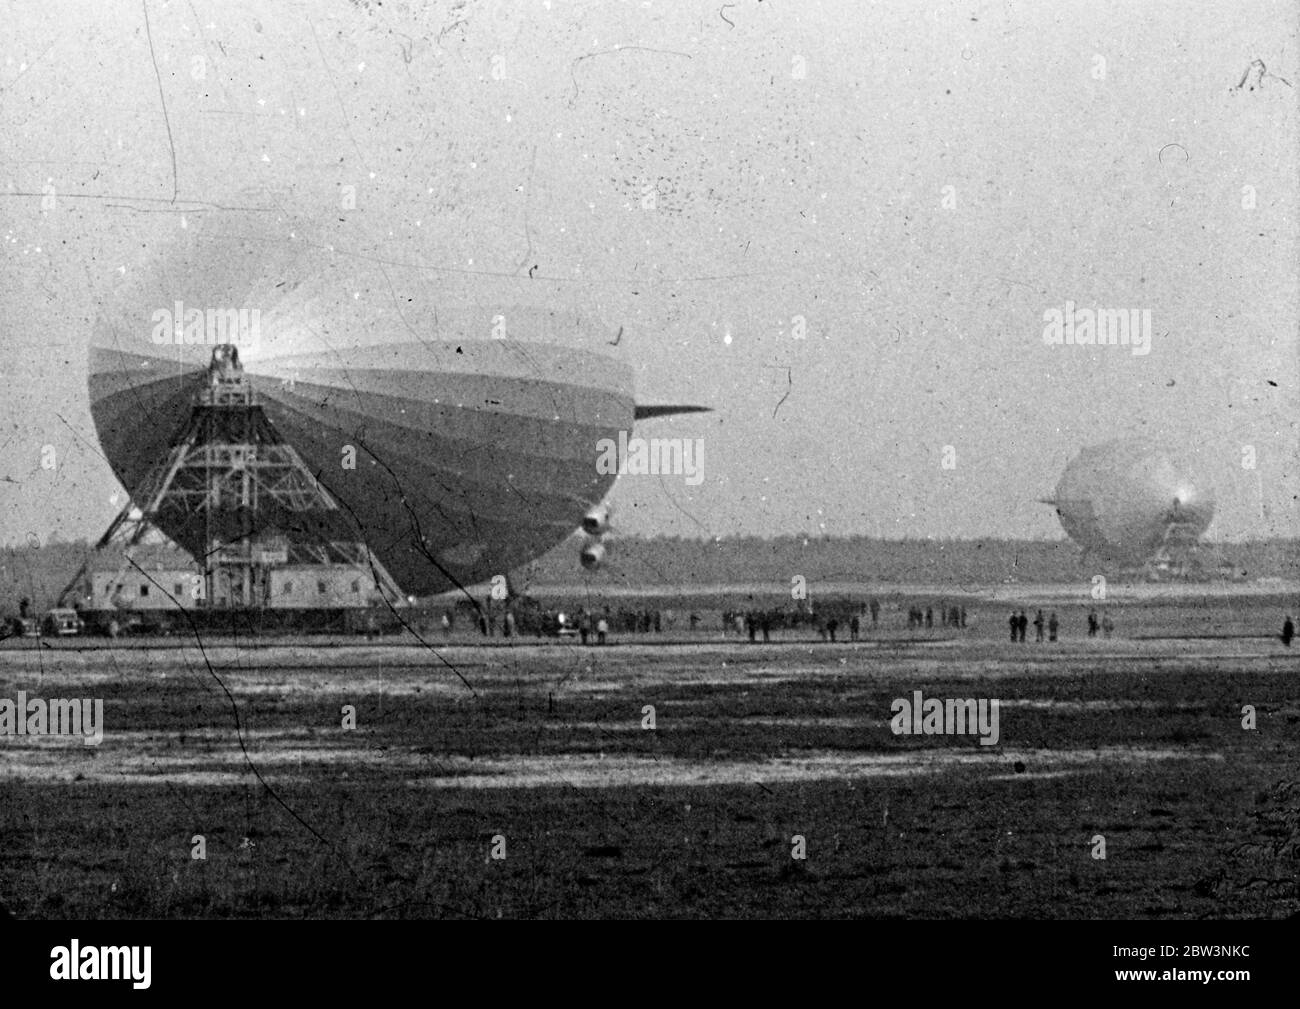 patient impulse Conversely First pictures of Hindenburg arrival in America . Brought to Europe by  giant airship on return flight . These pictures , brought back to Europe by  the Hindenburg herself on her record